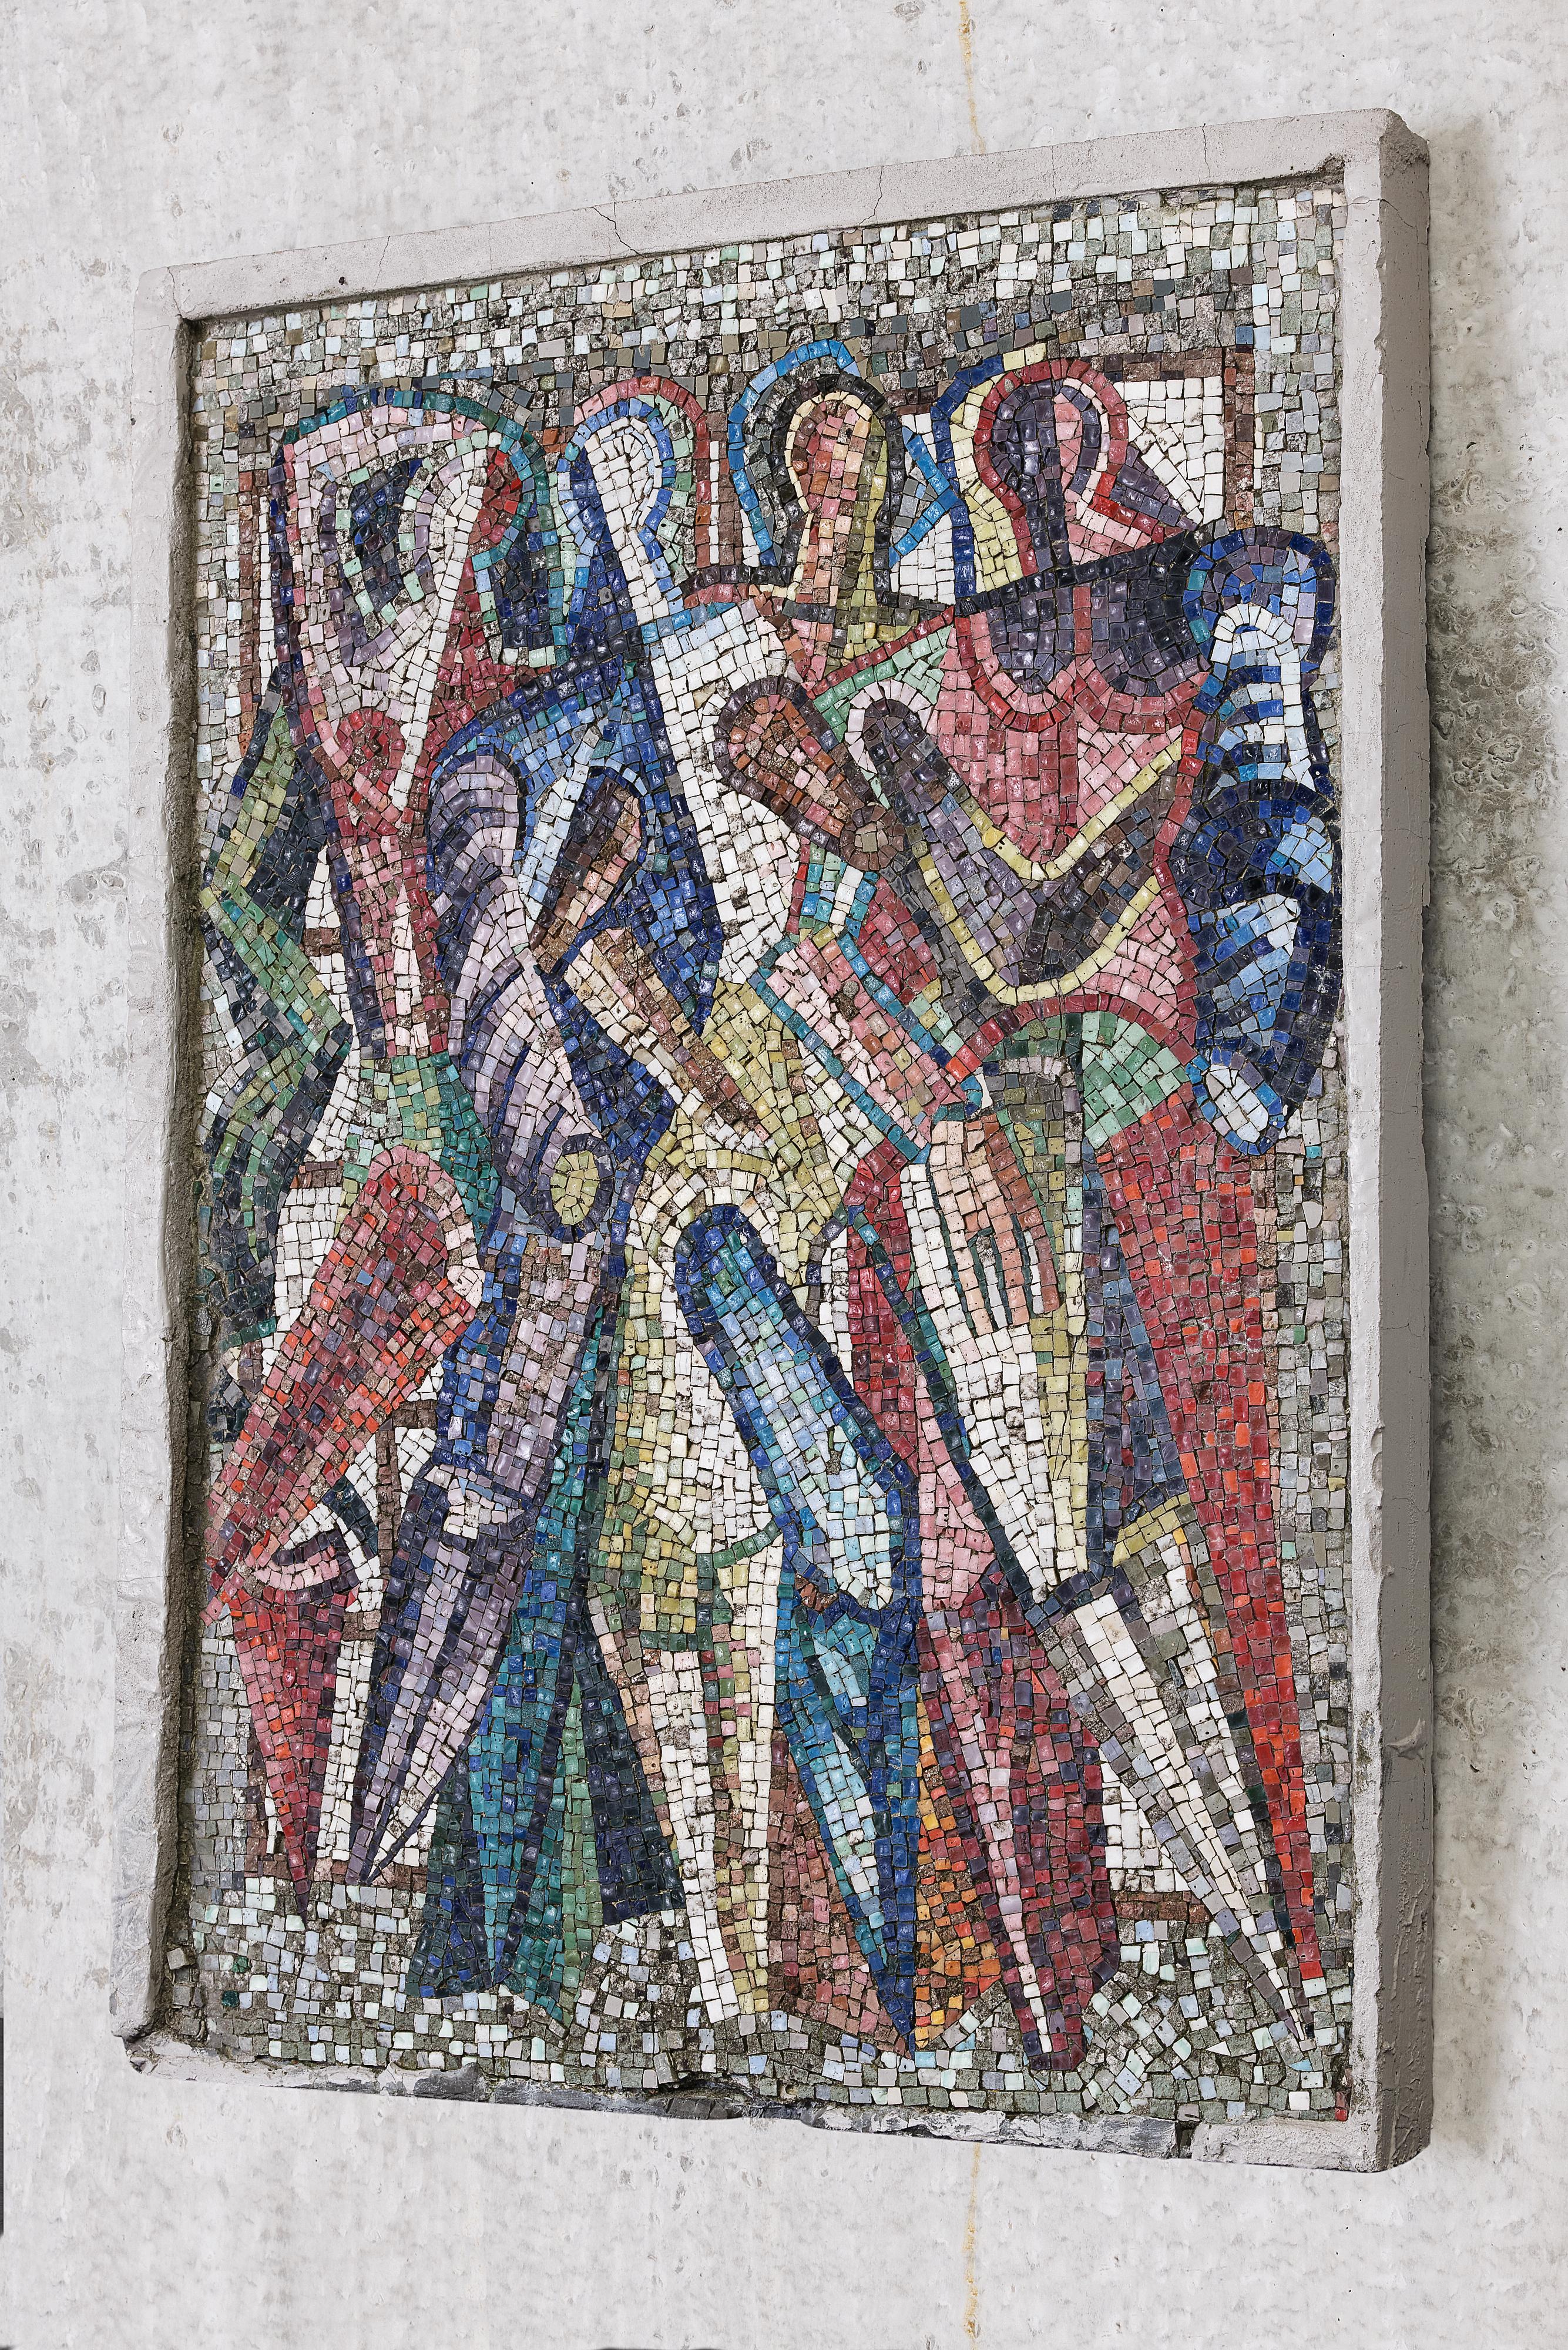 A large bright and colorful mosaic of several abstract figures called 'Geweld' (Violence), set in a concrete base. It is the counterpart of another mural called ‘Vrede’ (Peace). 

This mosaic was made by the Dutch artist couple Nel Klaassen and her